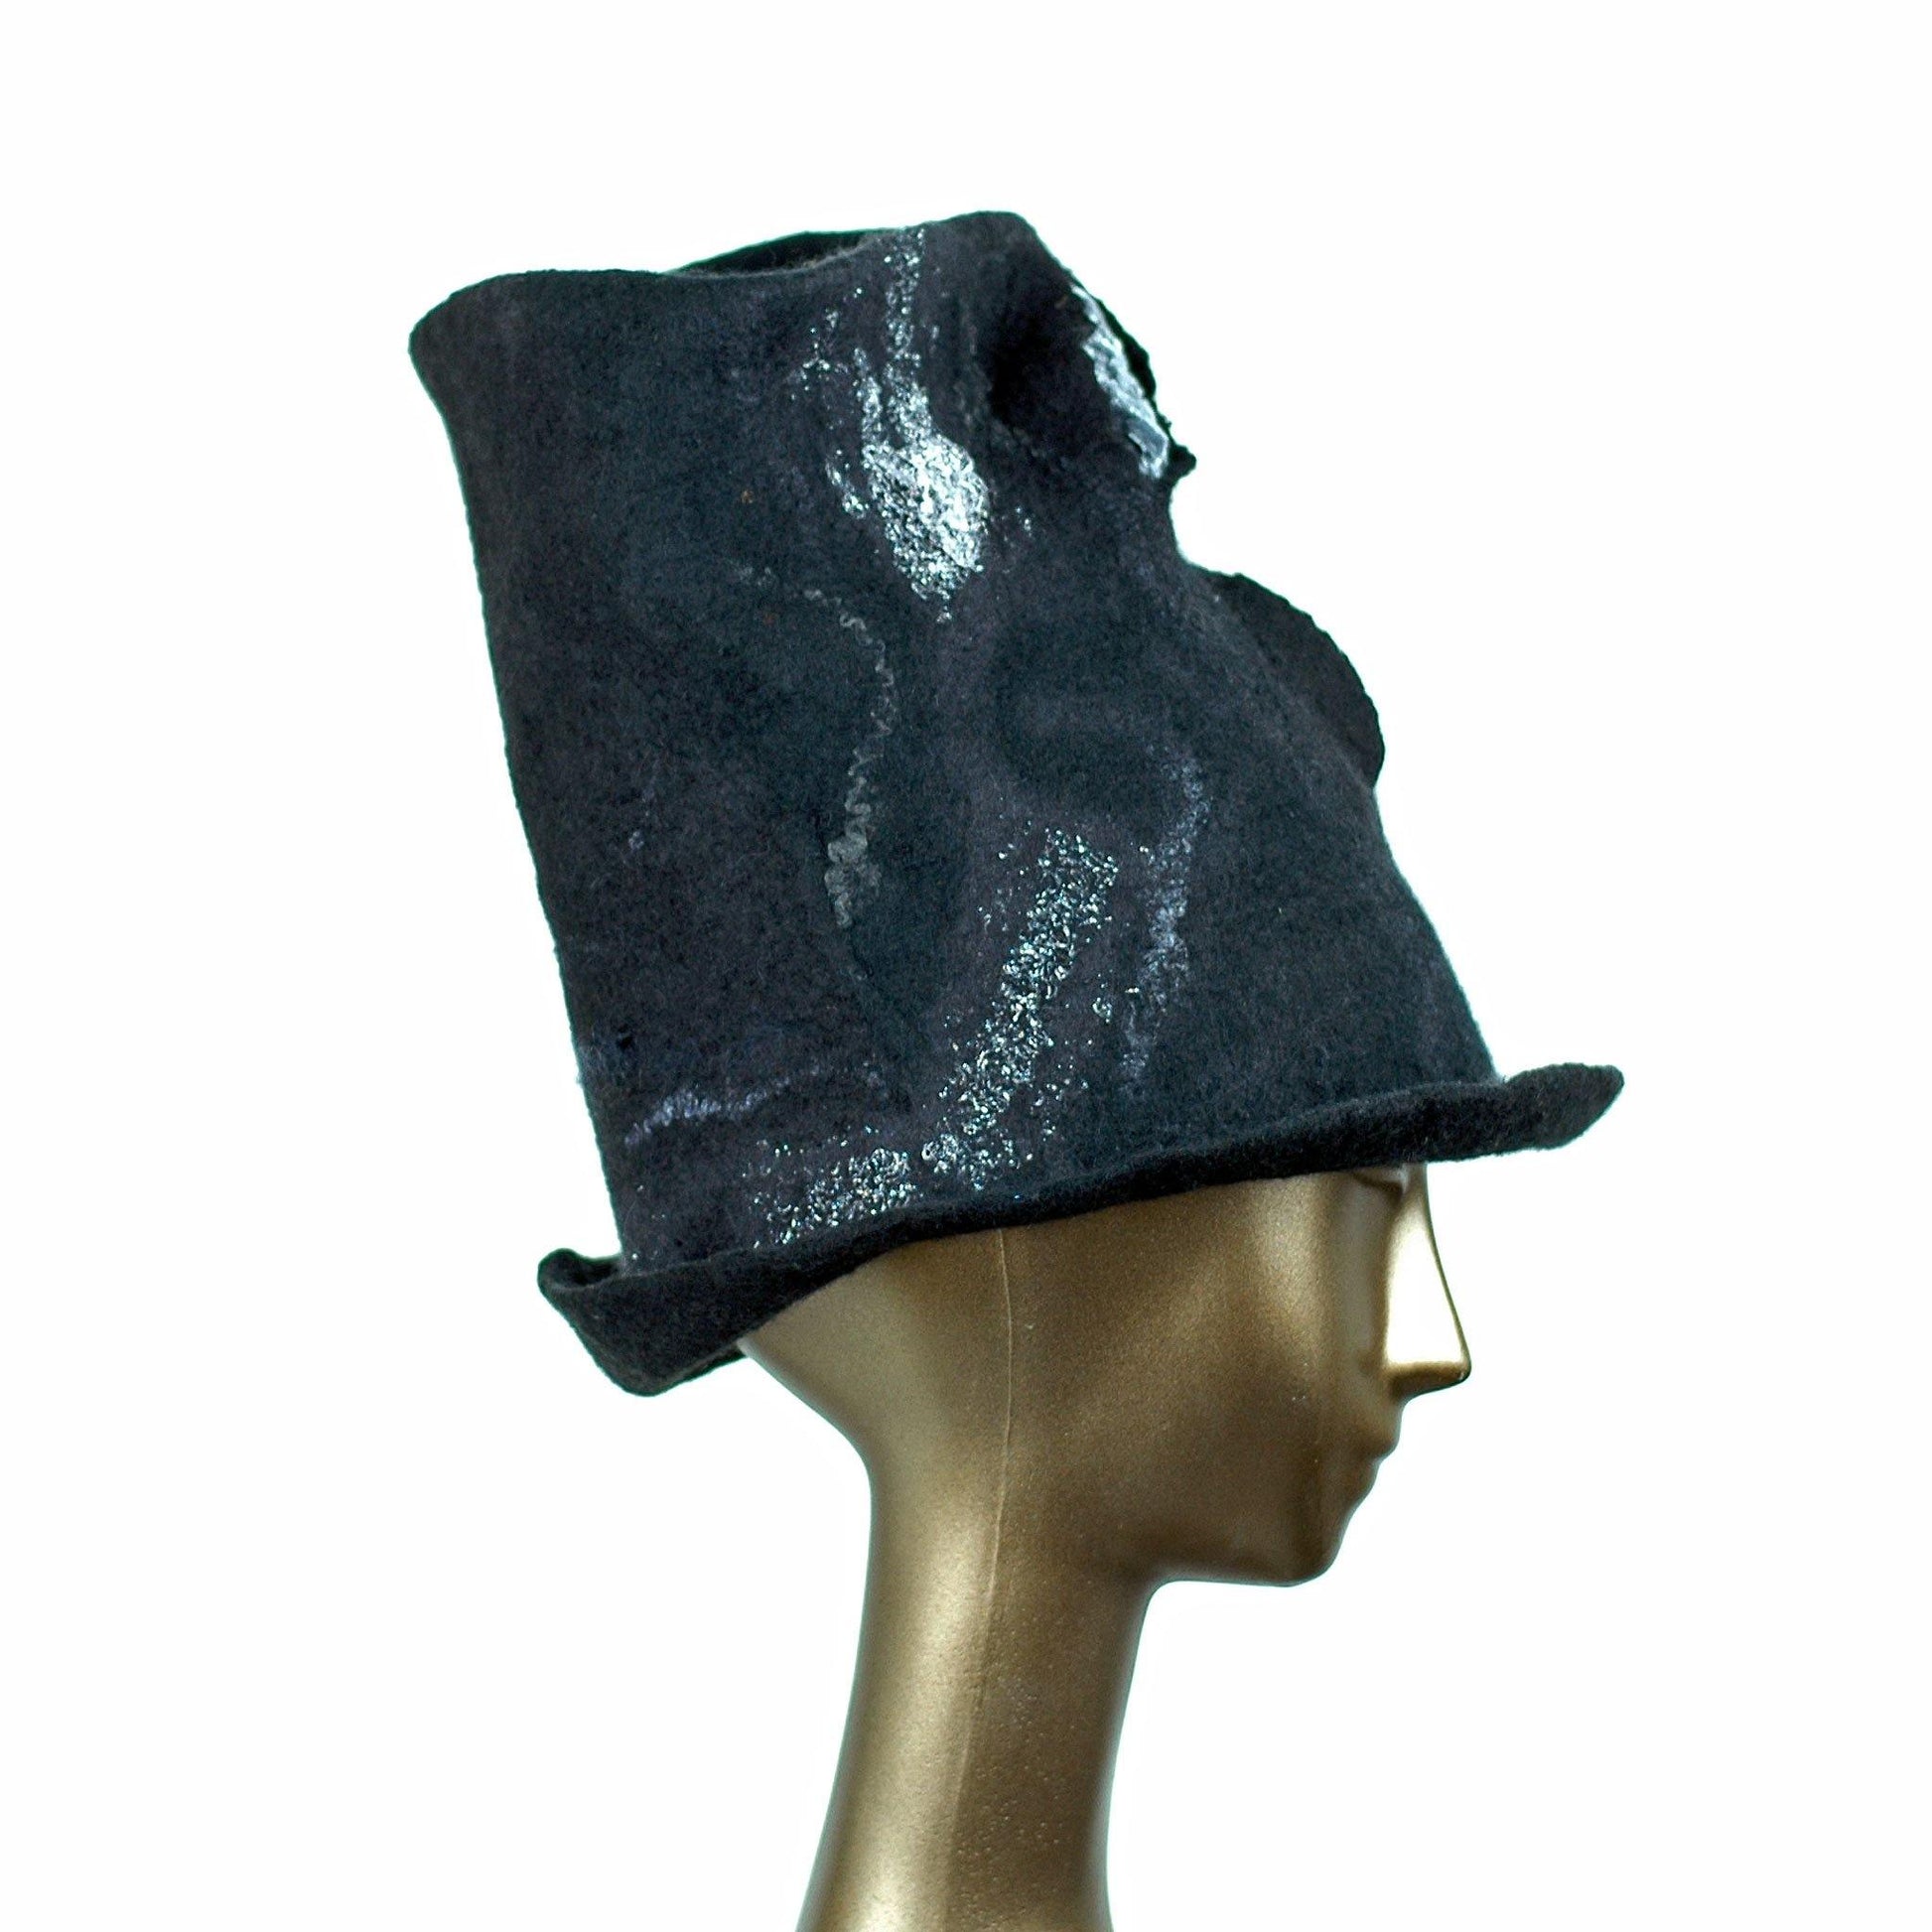 Tall Black Felted Top Hat with Velvet Decorations - side view